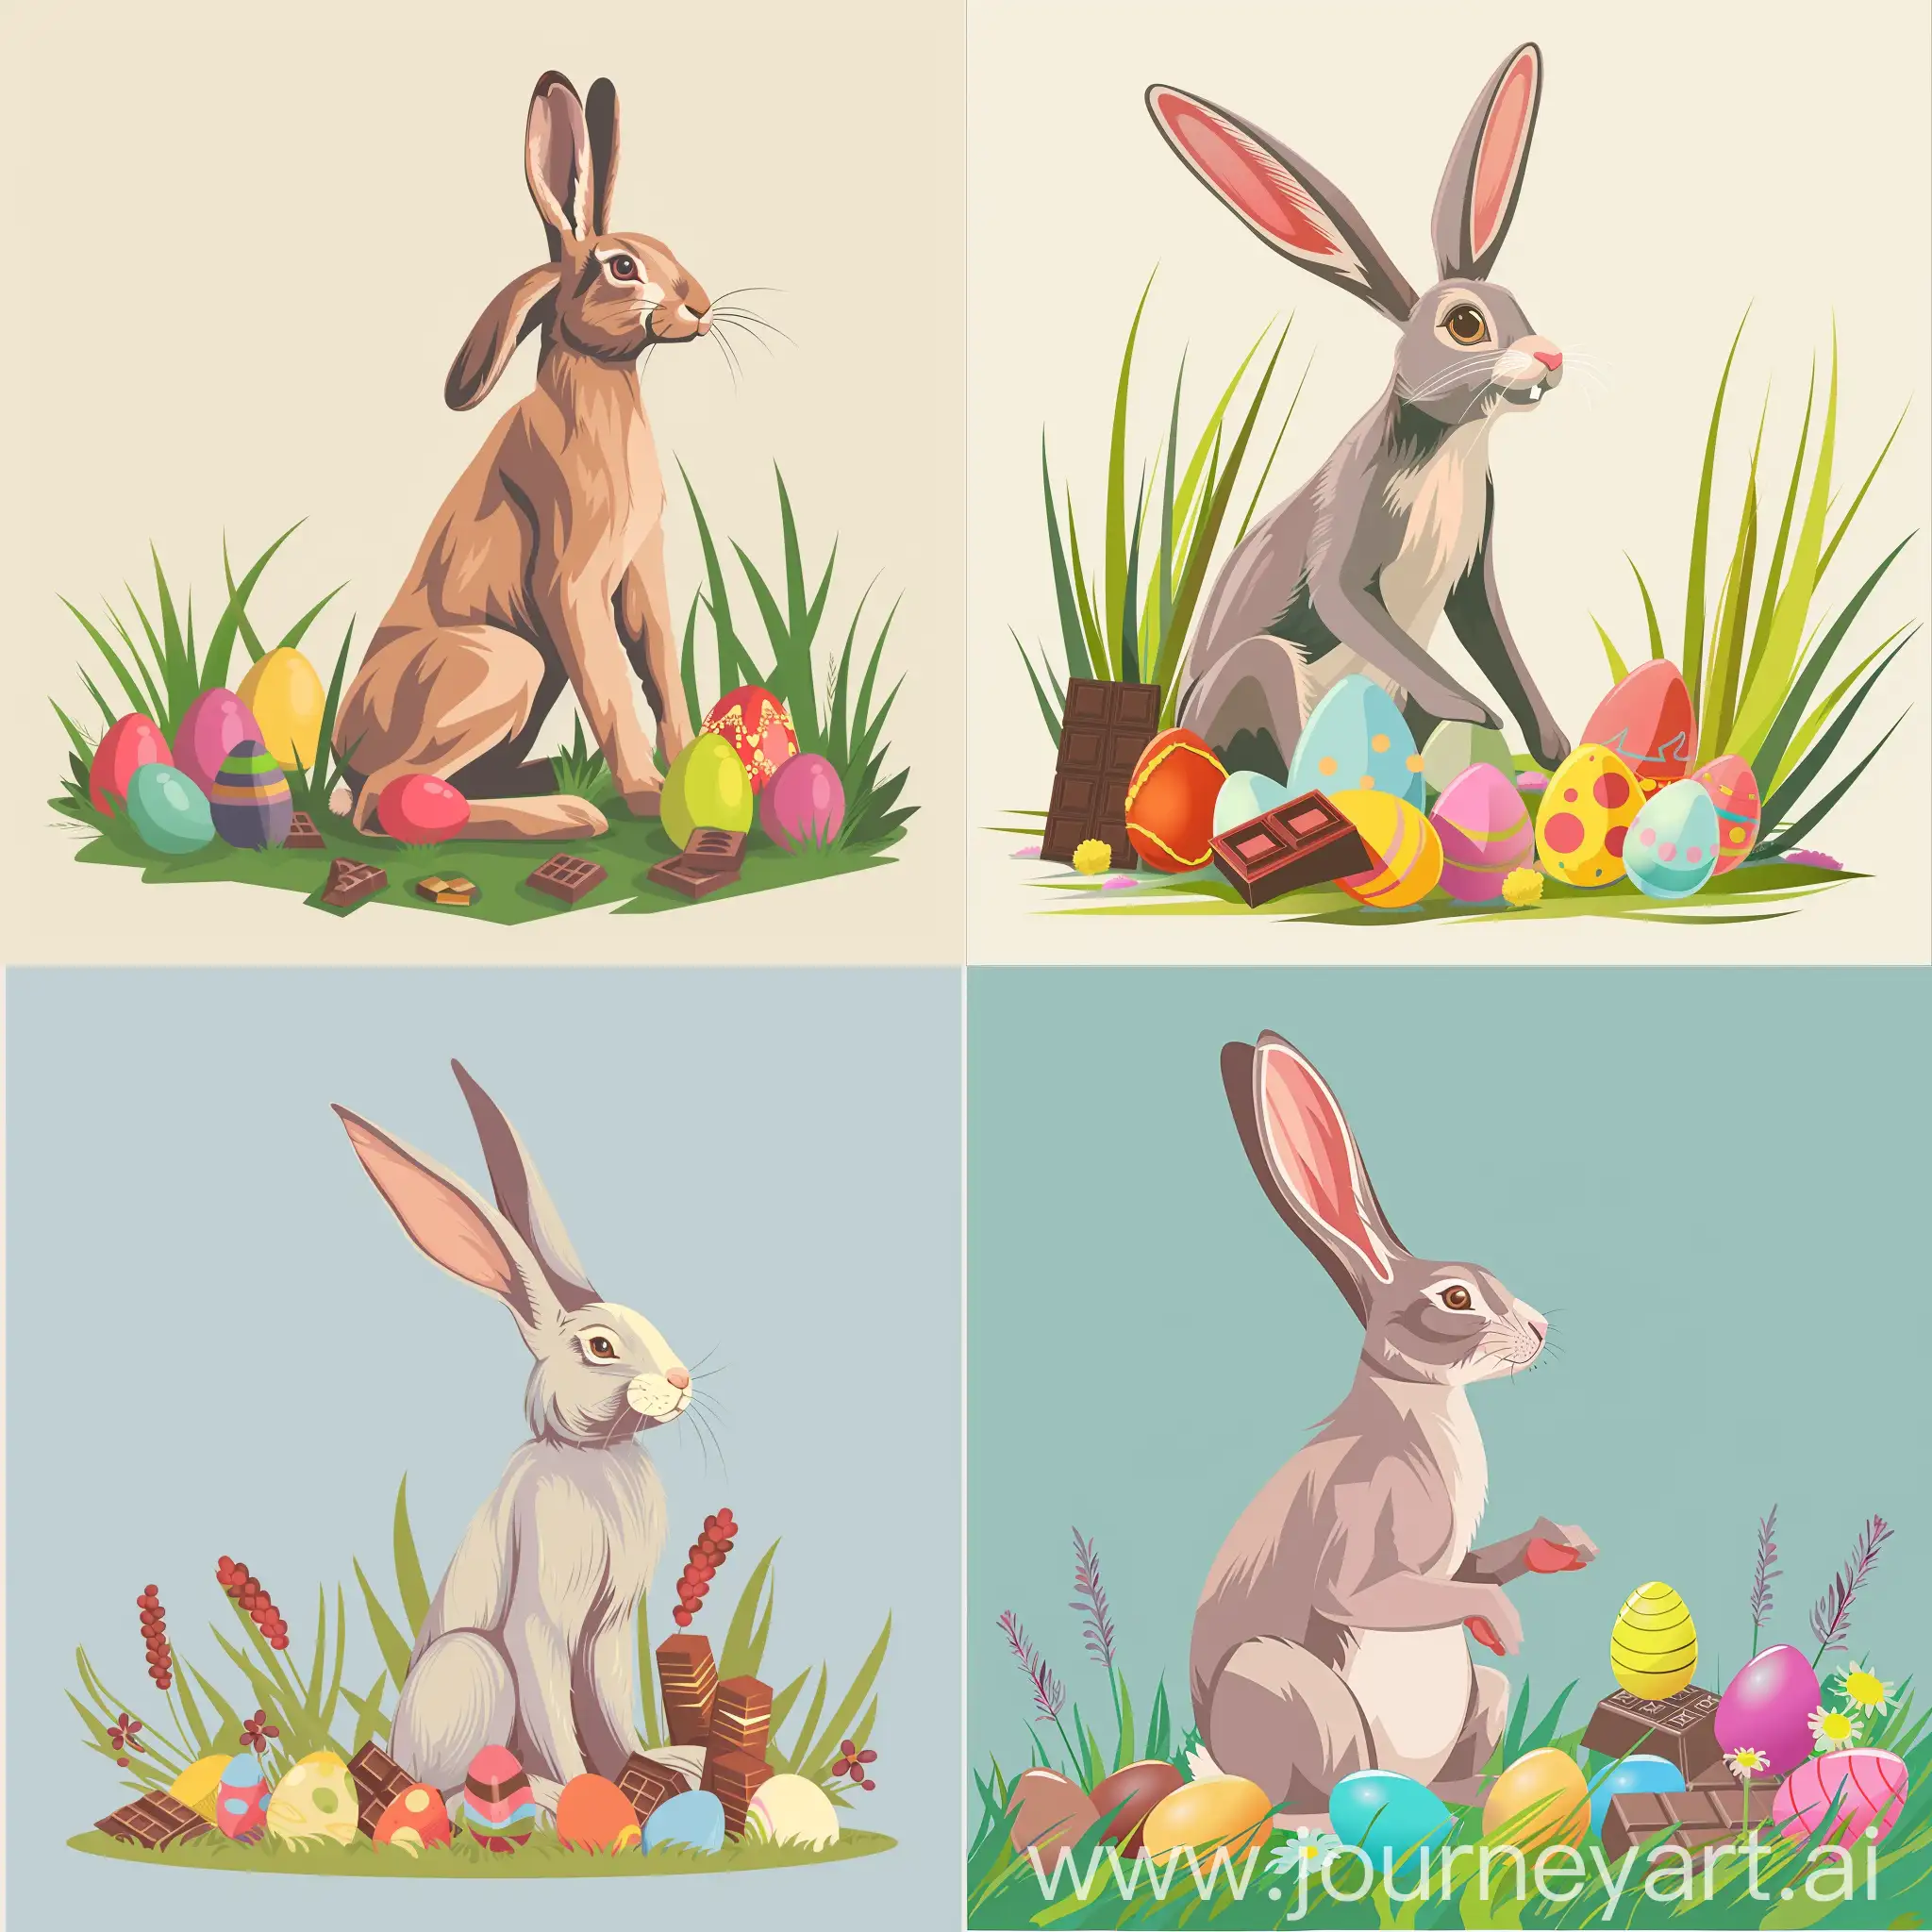 The Easter bunny is sitting on its hind legs in the grass, it has a slender body, long ears. Next to him are colorful eggs and chocolates.r, in high quality flat style